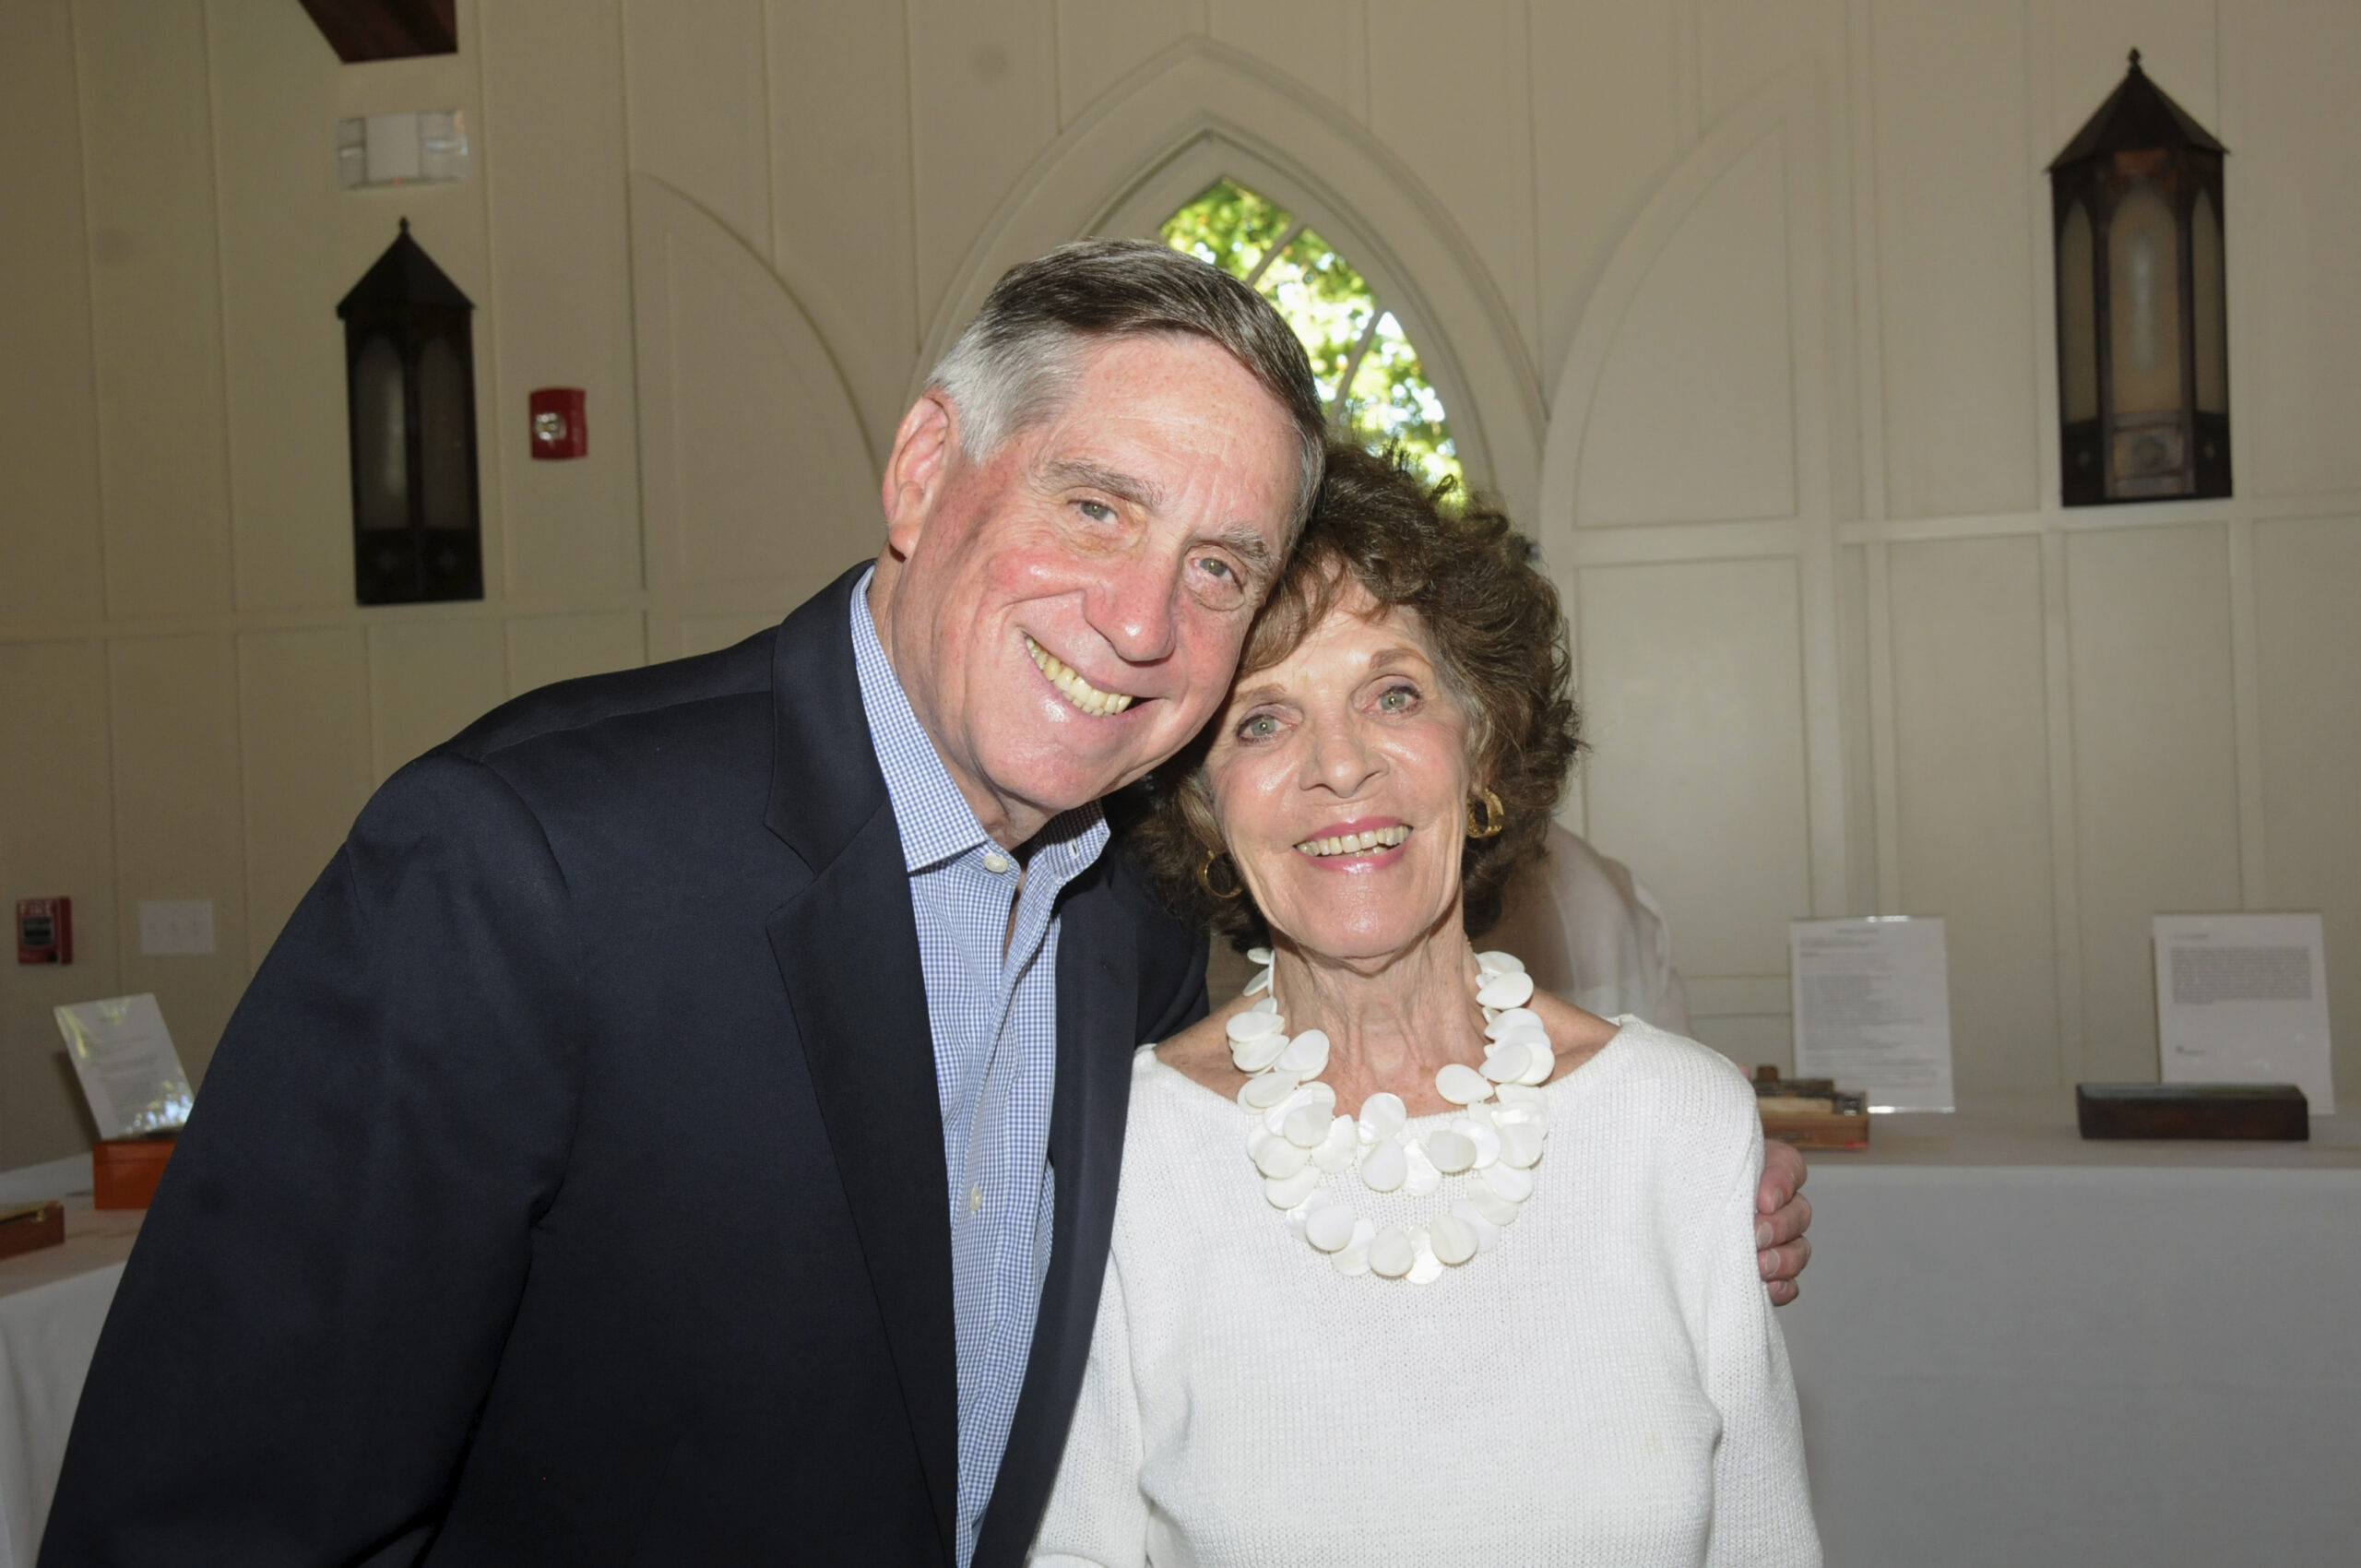 Gary Adamek and Arlene Bujese at the East End Hospice 21st annual Box Art Auction preview reception on August 24 at Hoie Hall at St. Luke's Church in East Hampton . Dozens of local artists contributed their vision and creation of 